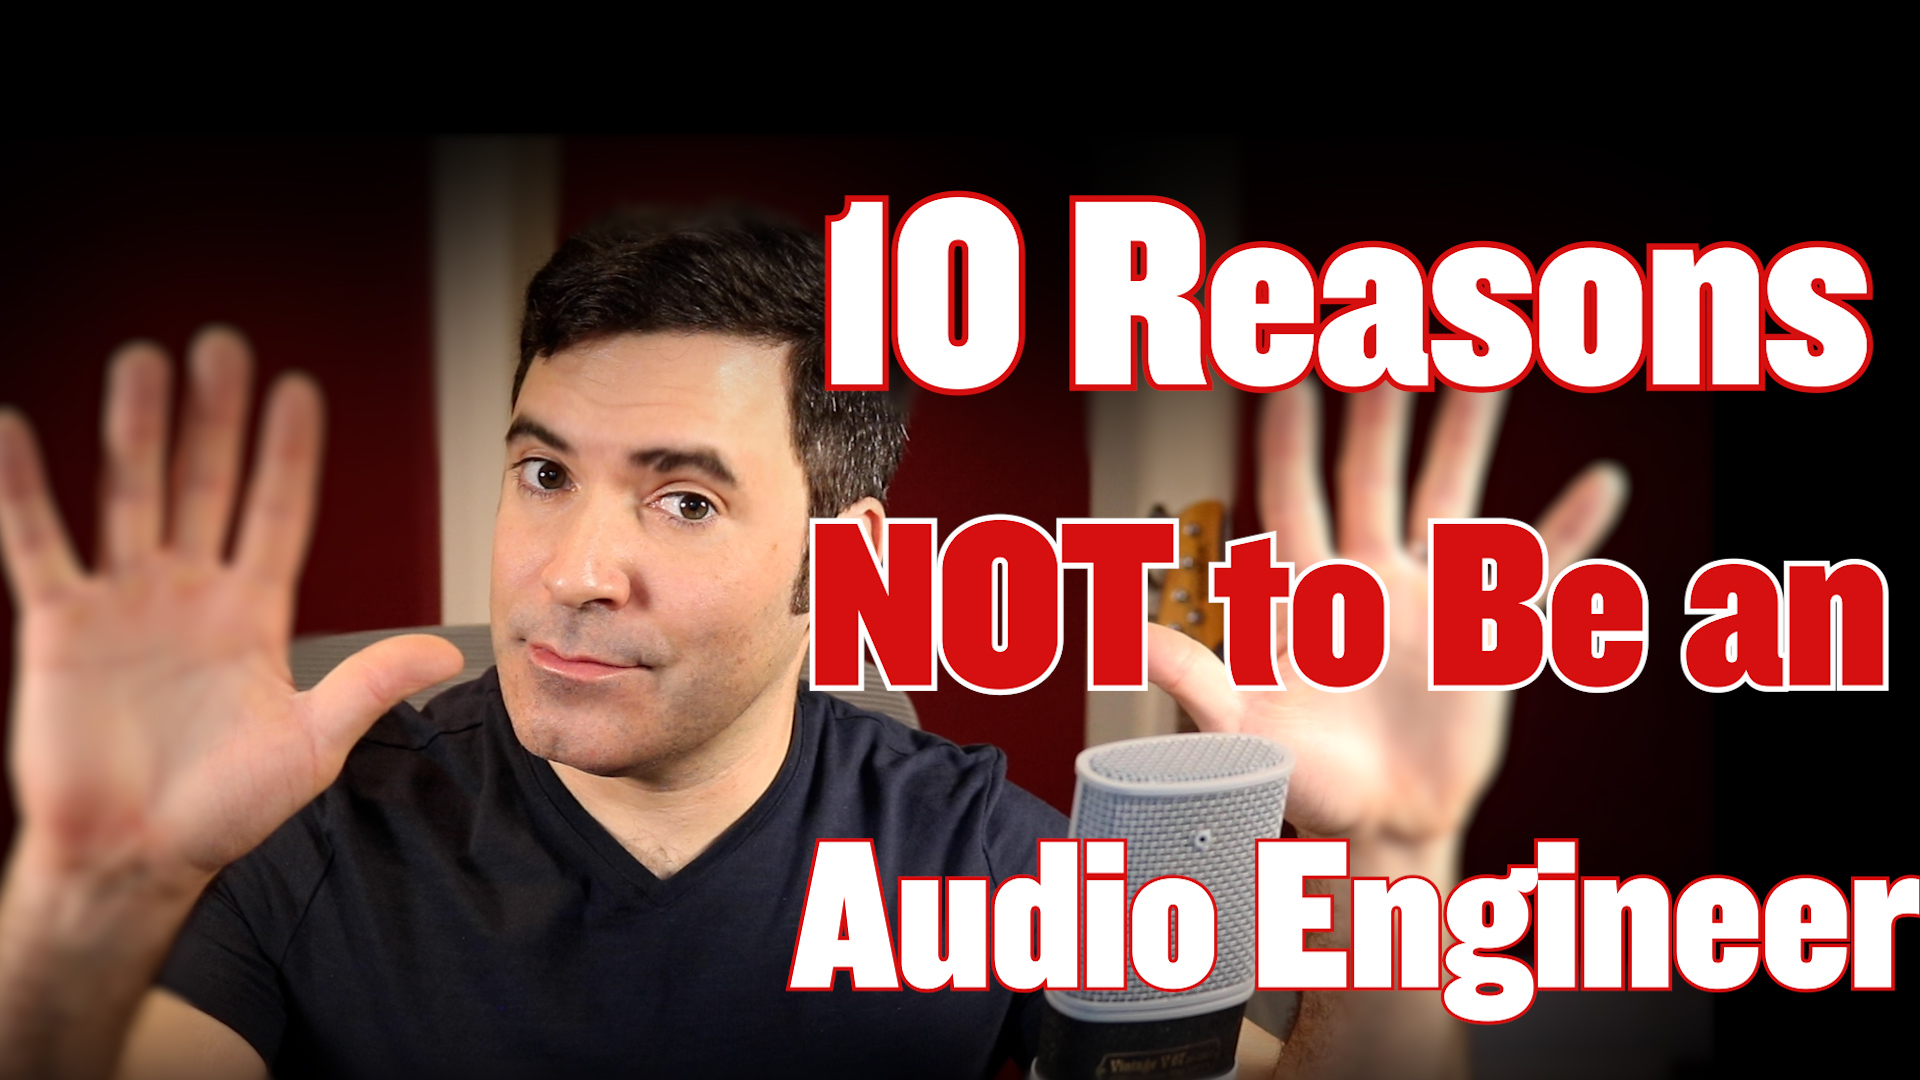 Top 10 Reasons Not to Be an Audio Engineer